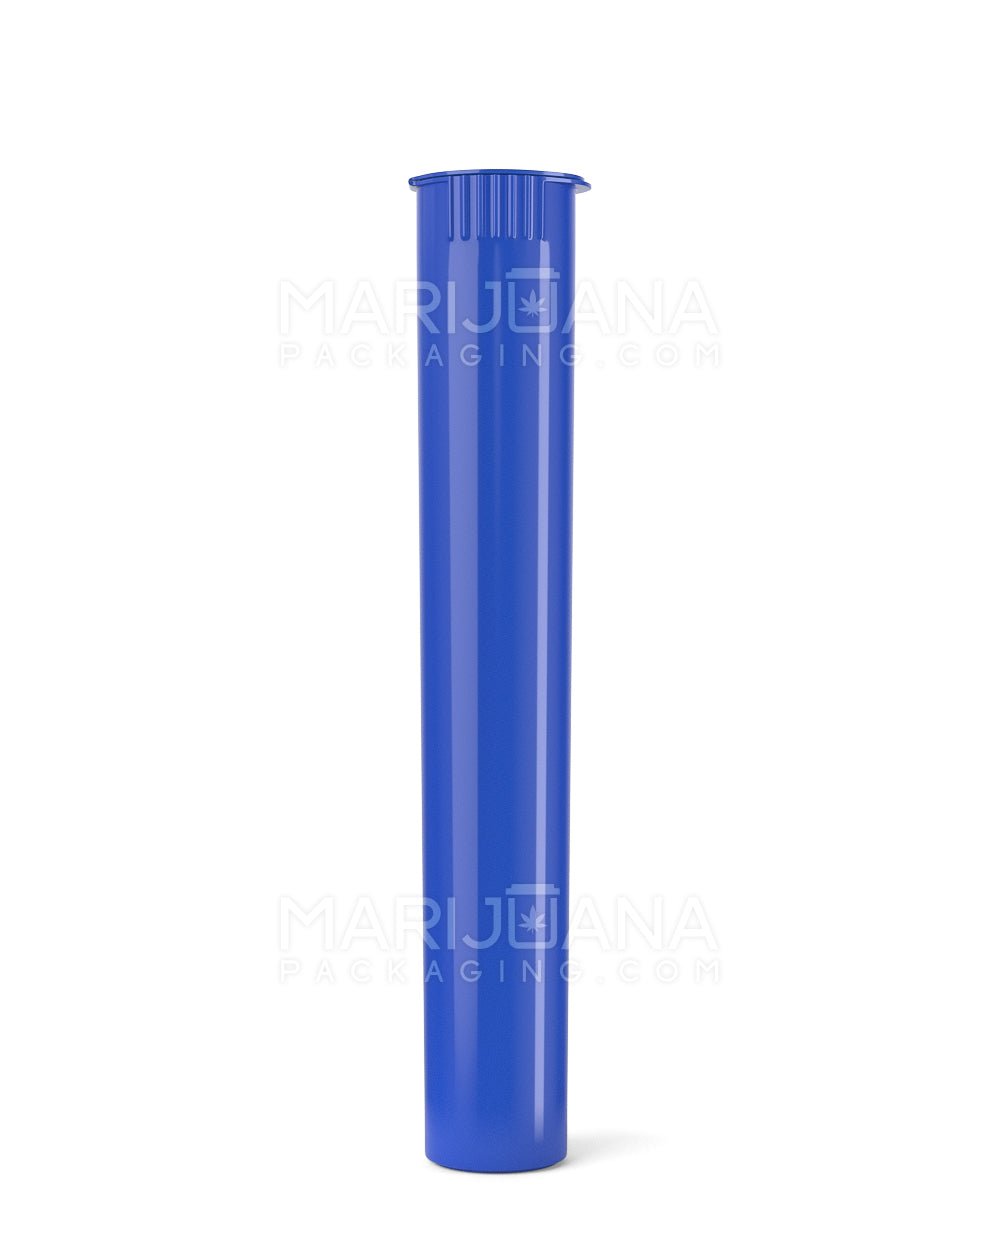 Child Resistant | King Size Pop Top Opaque Plastic Pre-Roll Tubes | 116mm - Blue - 1000 Count - 2